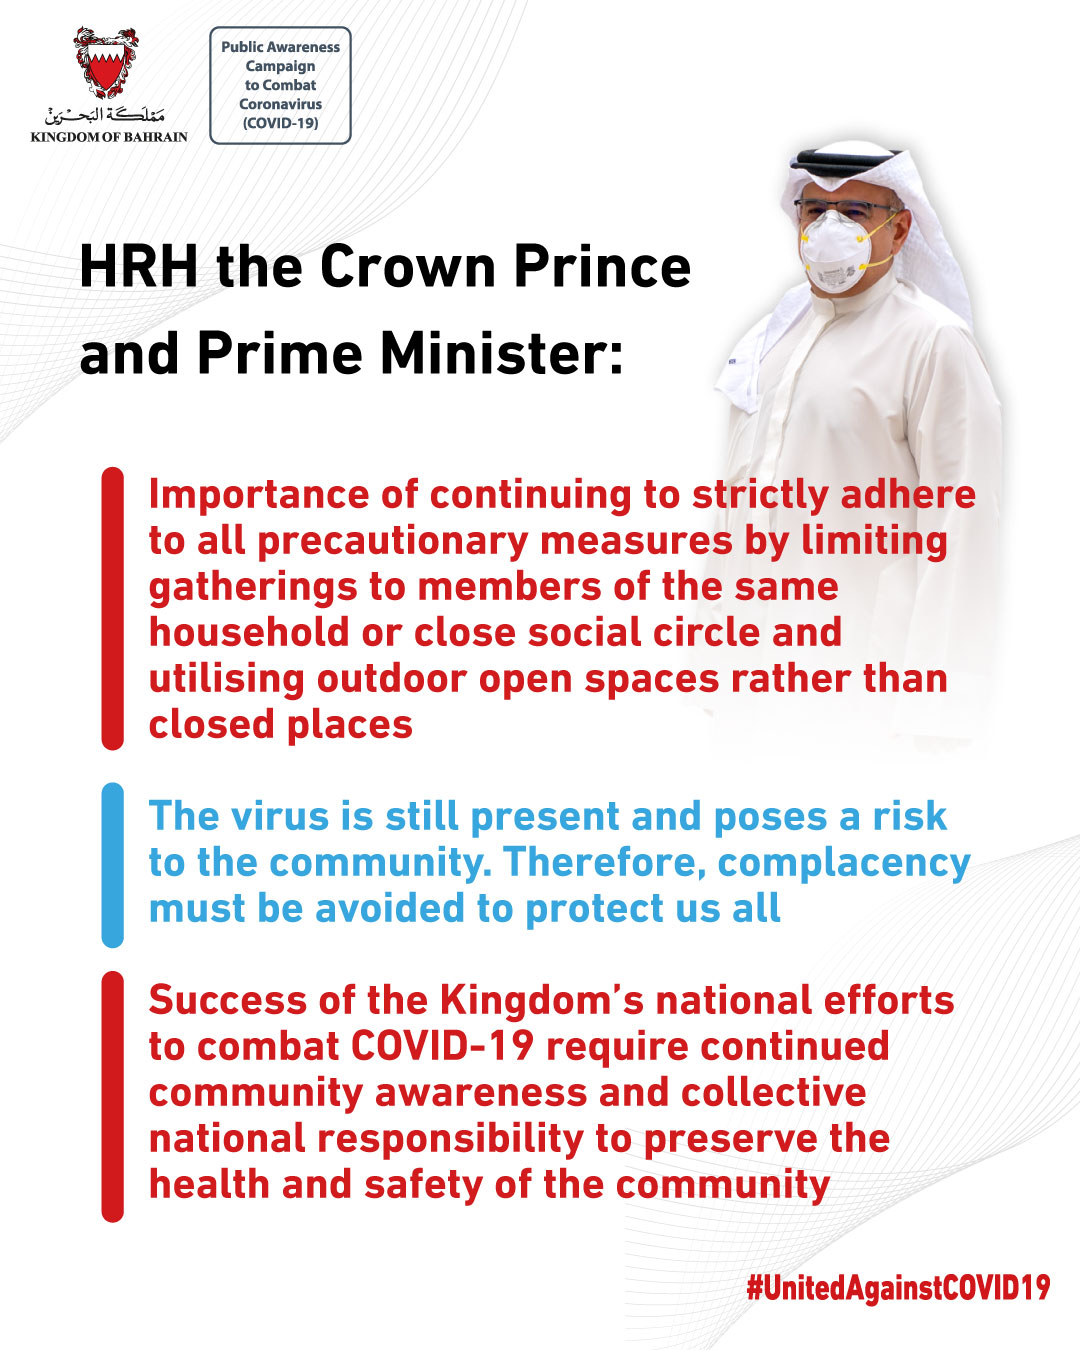 HRH the Crown Prince and Prime Minister stresses the importance of continuing to comply with precautionary measures to combat COVID-19